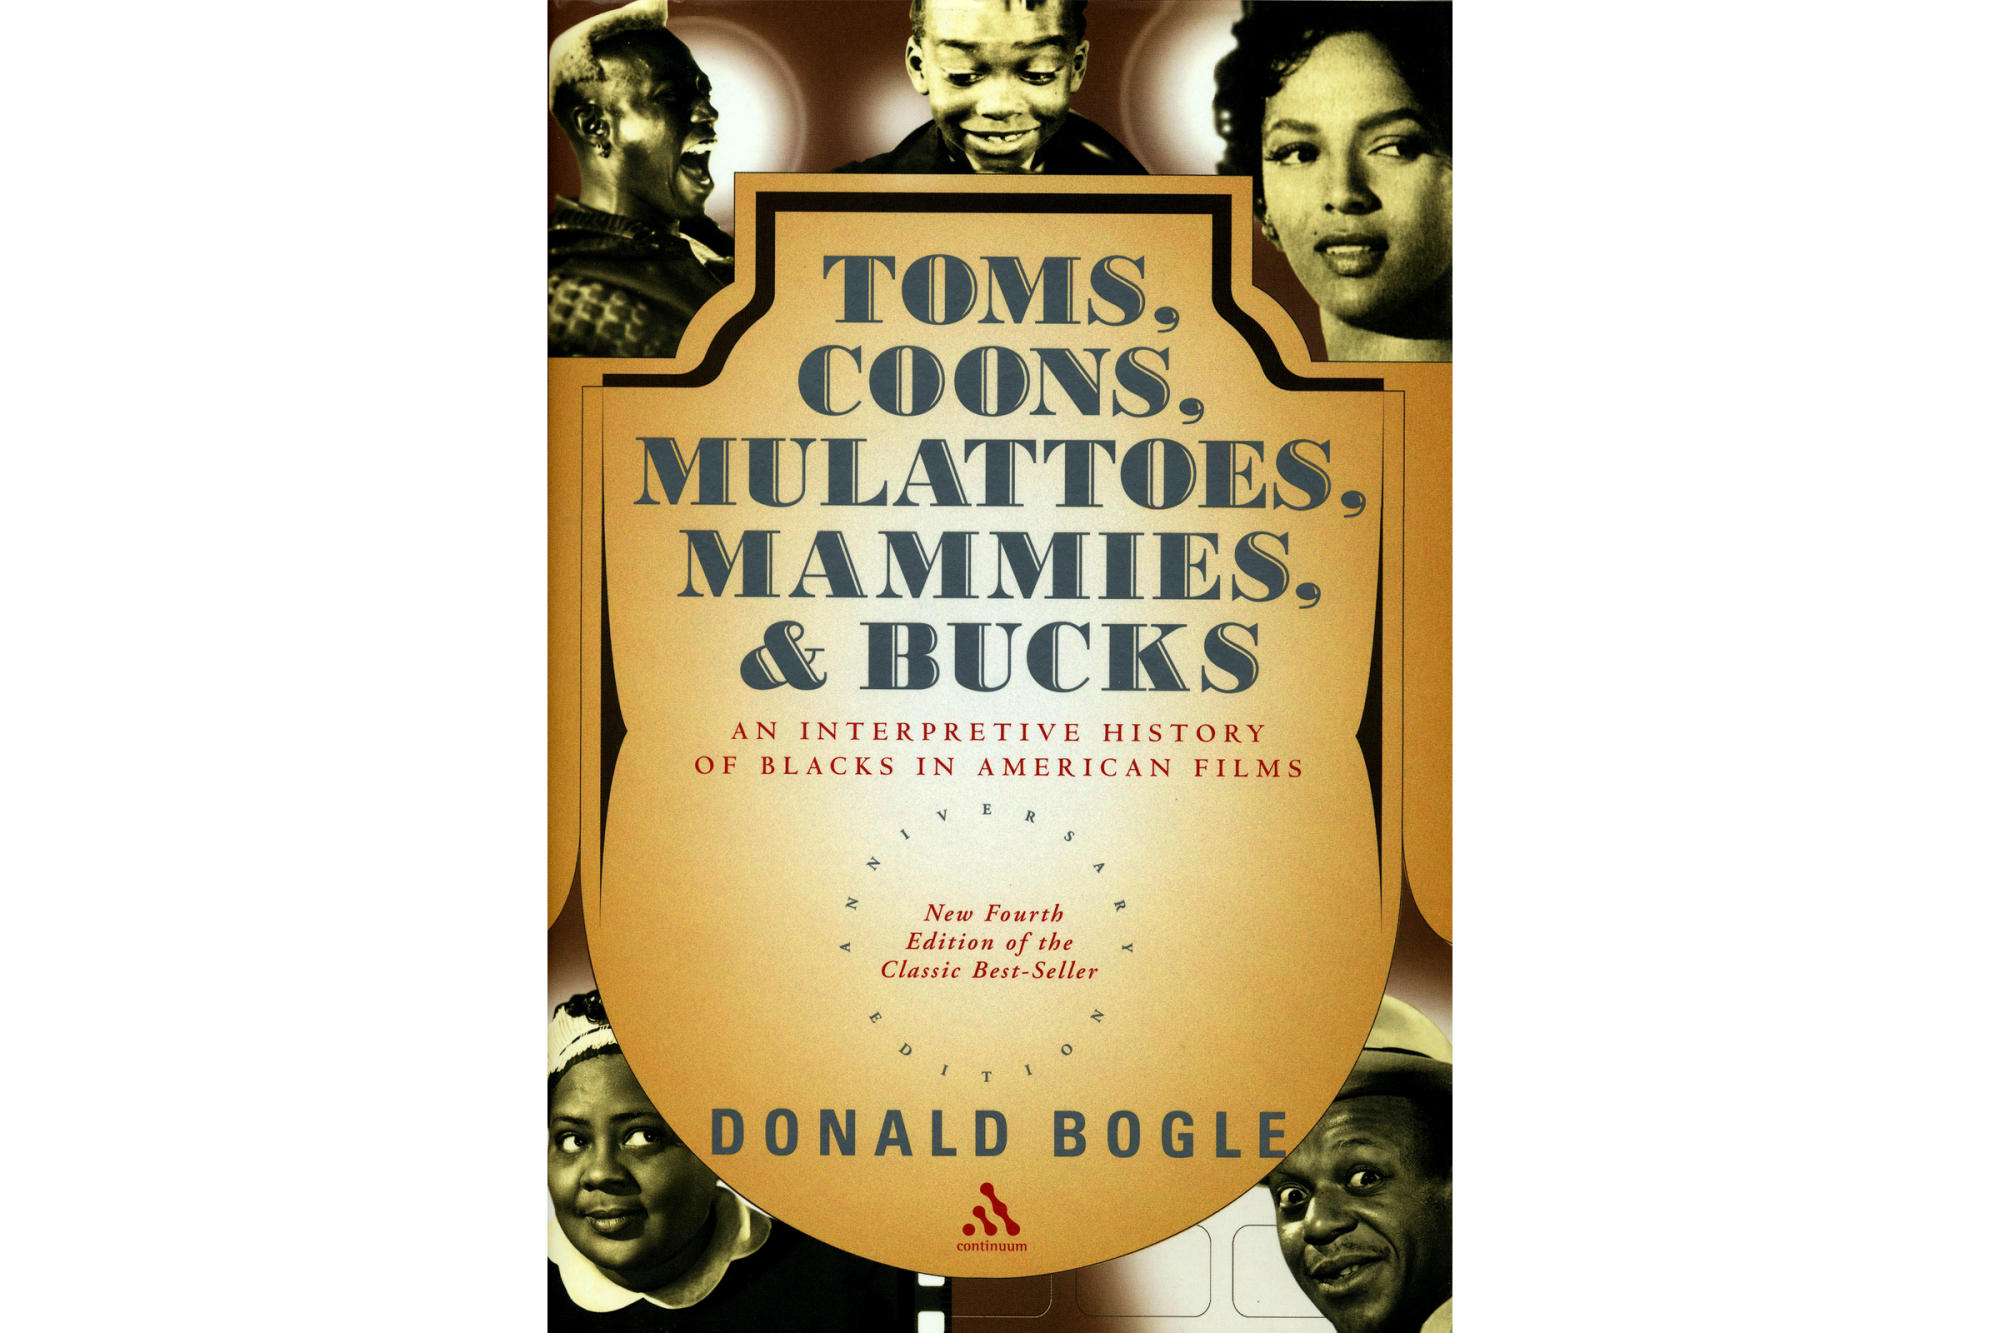 "Toms, Coons, Mulattoes, Mammies and Bucks" by Donald Bogle